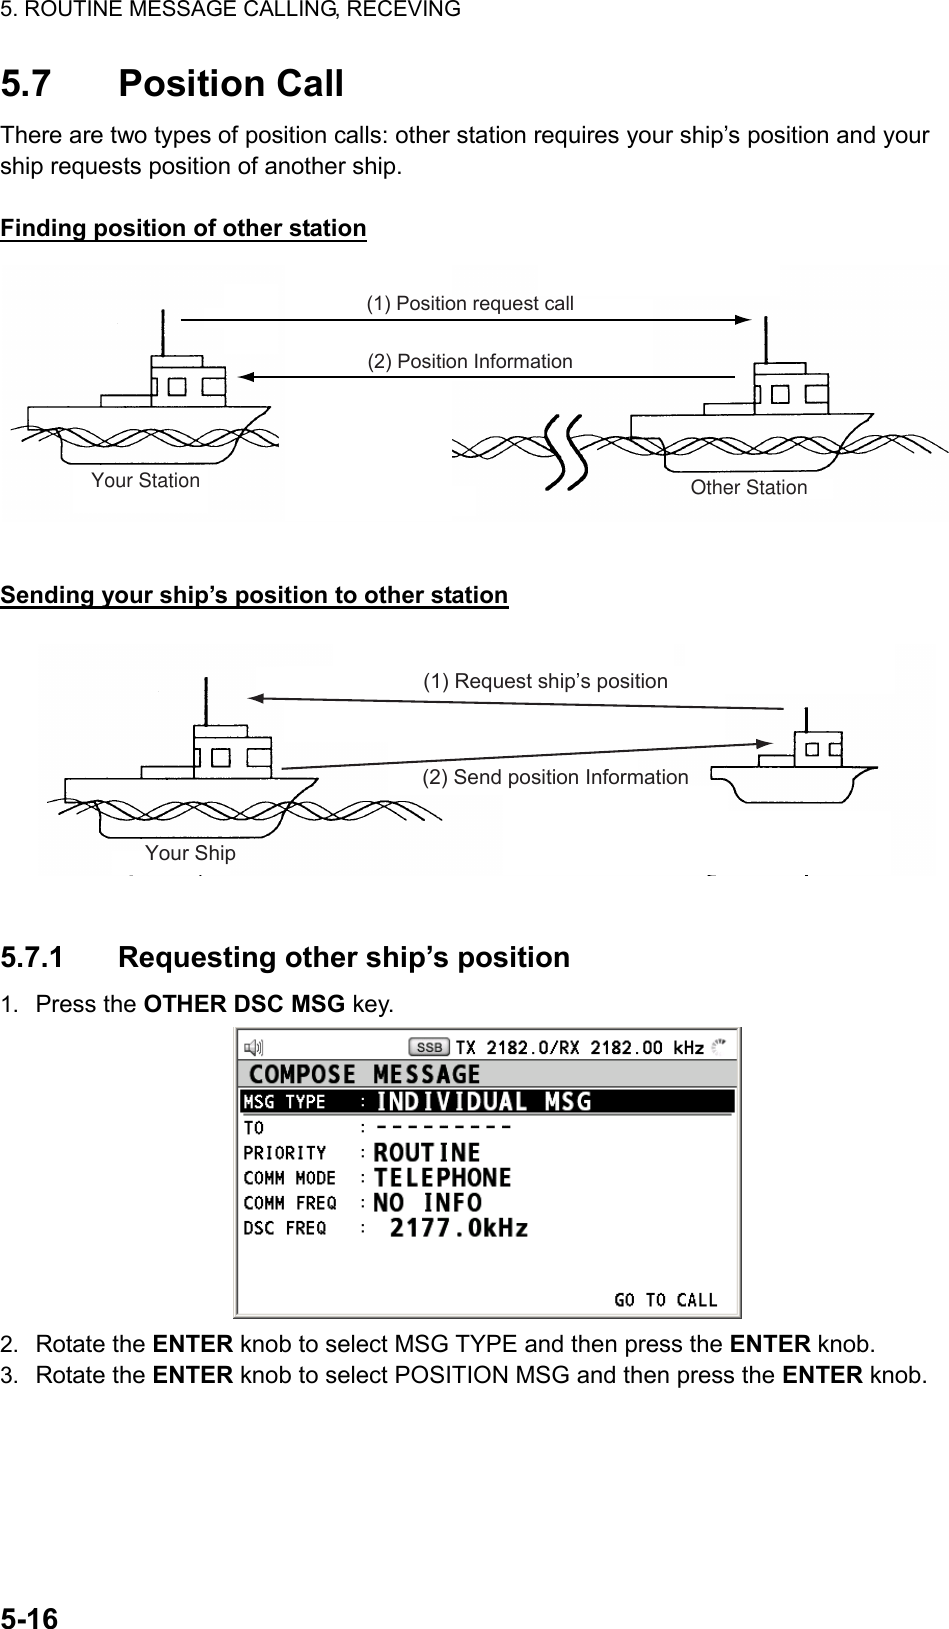 5. ROUTINE MESSAGE CALLING, RECEVING  5-16  5.7 Position Call There are two types of position calls: other station requires your ship’s position and your ship requests position of another ship.  Finding position of other station (1) Position request call(2) Position InformationYour Station Other Station  Sending your ship’s position to other station Your Ship(1) Request ship’s position(2) Send position Information  5.7.1  Requesting other ship’s position 1.  Press the OTHER DSC MSG key.  2.  Rotate the ENTER knob to select MSG TYPE and then press the ENTER knob. 3.  Rotate the ENTER knob to select POSITION MSG and then press the ENTER knob. 